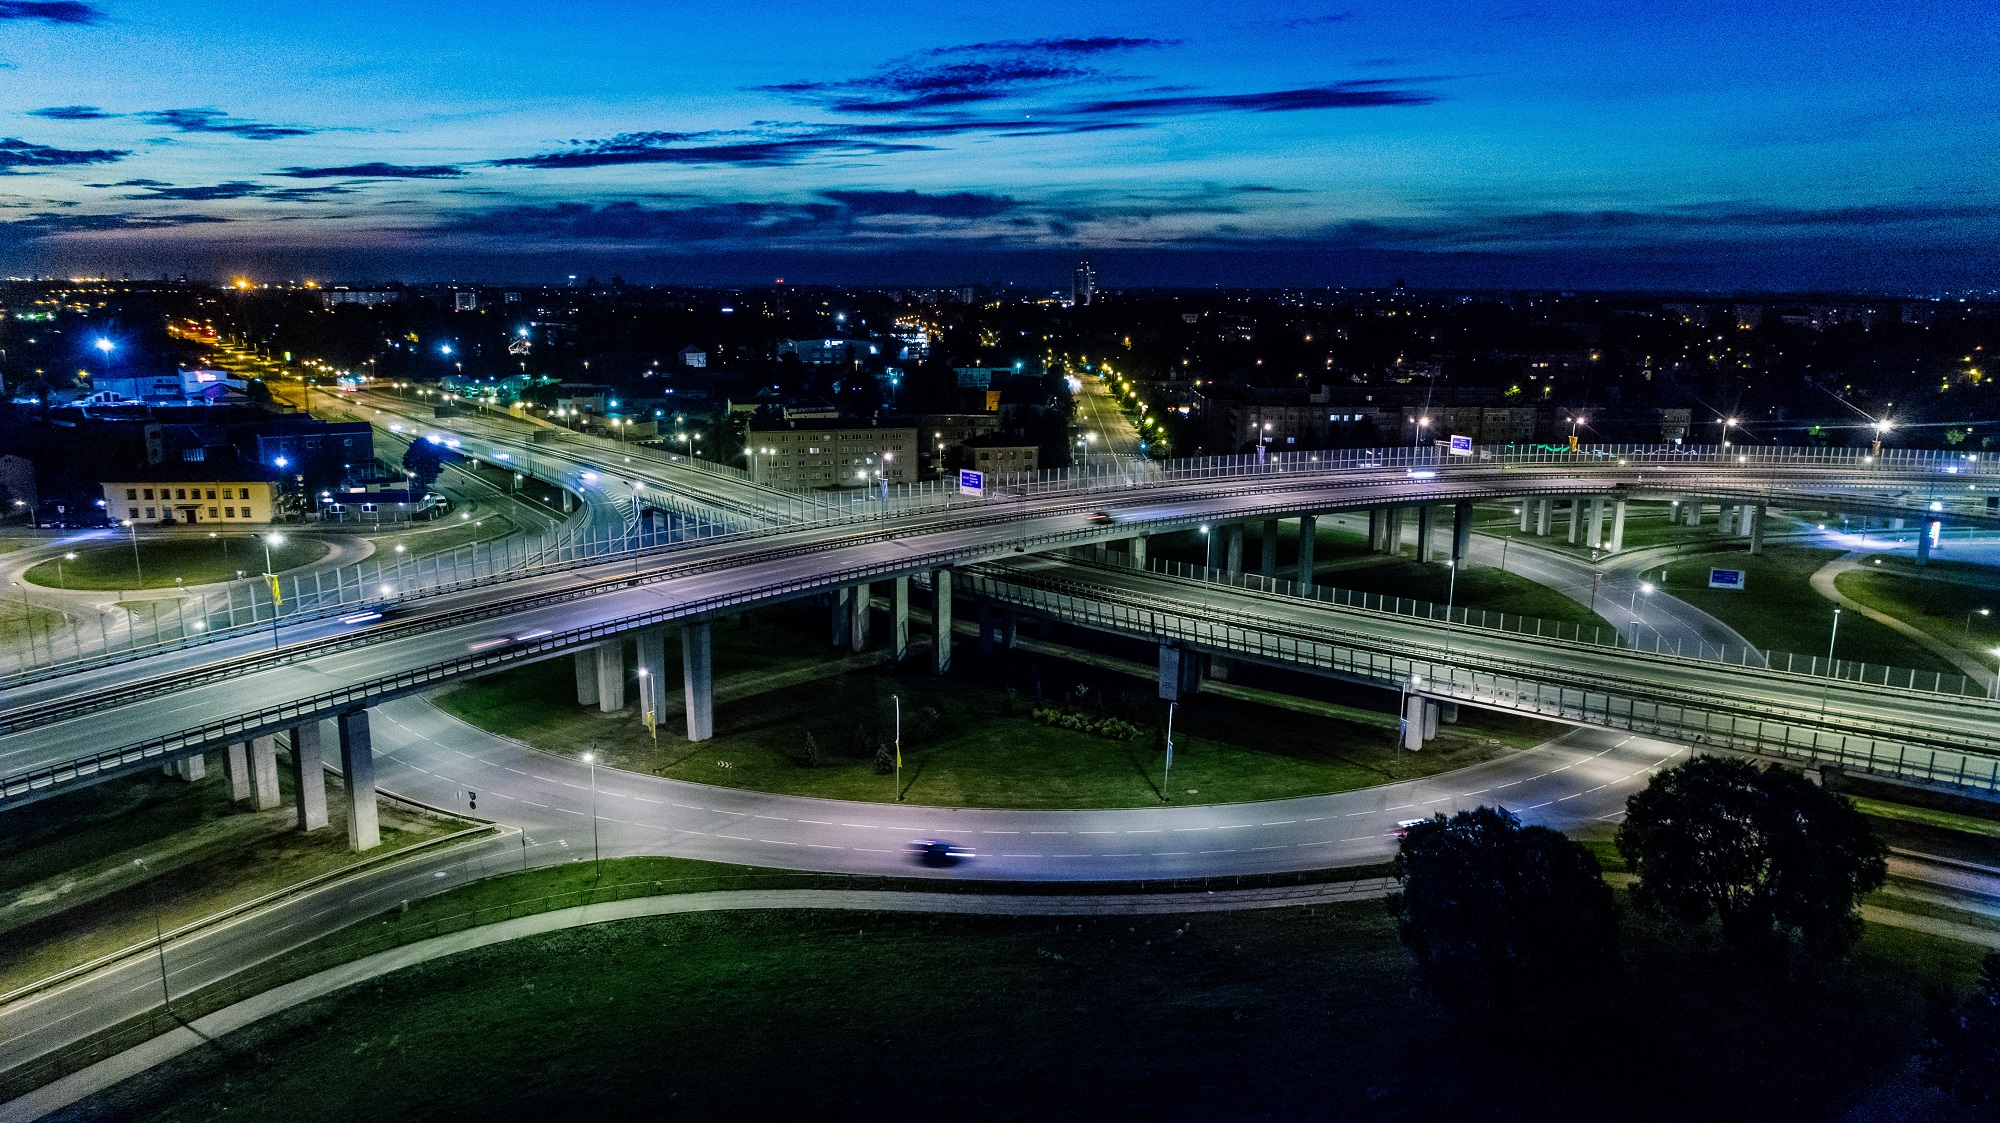 An interstate and highway overpass and interchange in a city at night